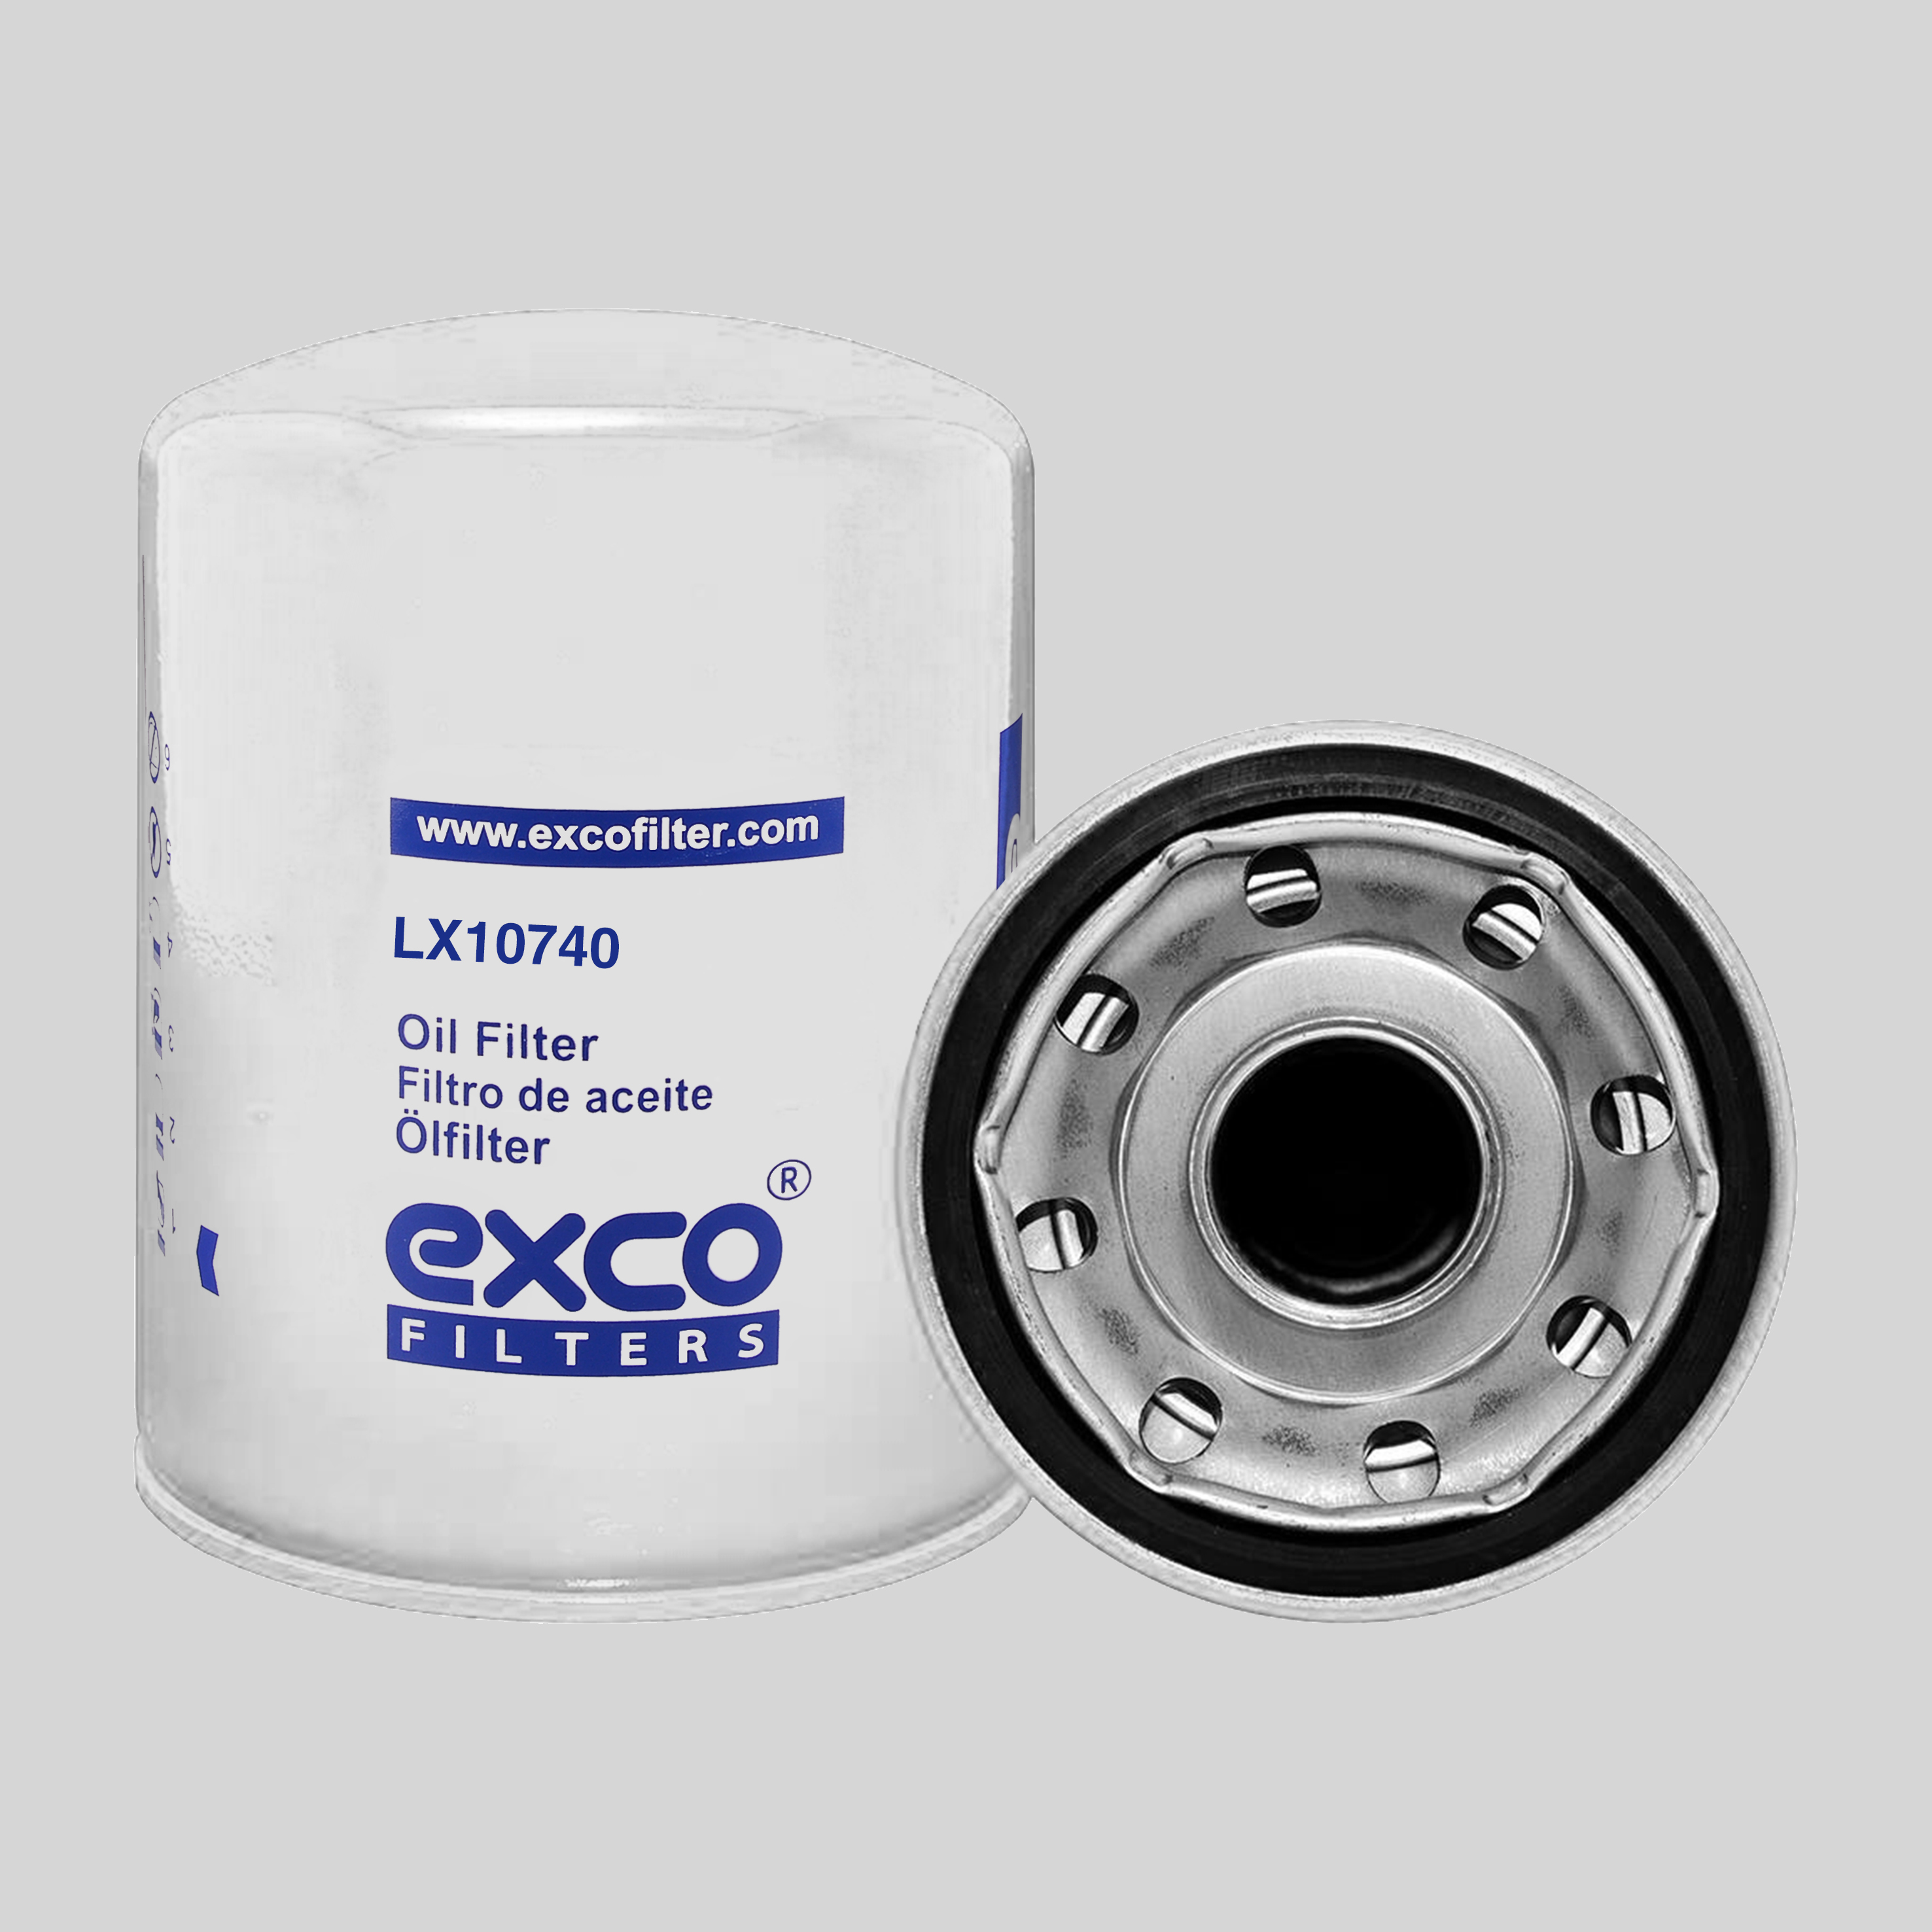 
                        
                                                                                                                BLOUNT 538233 - oil filter cross reference - excofilter
                                                                                    
                            